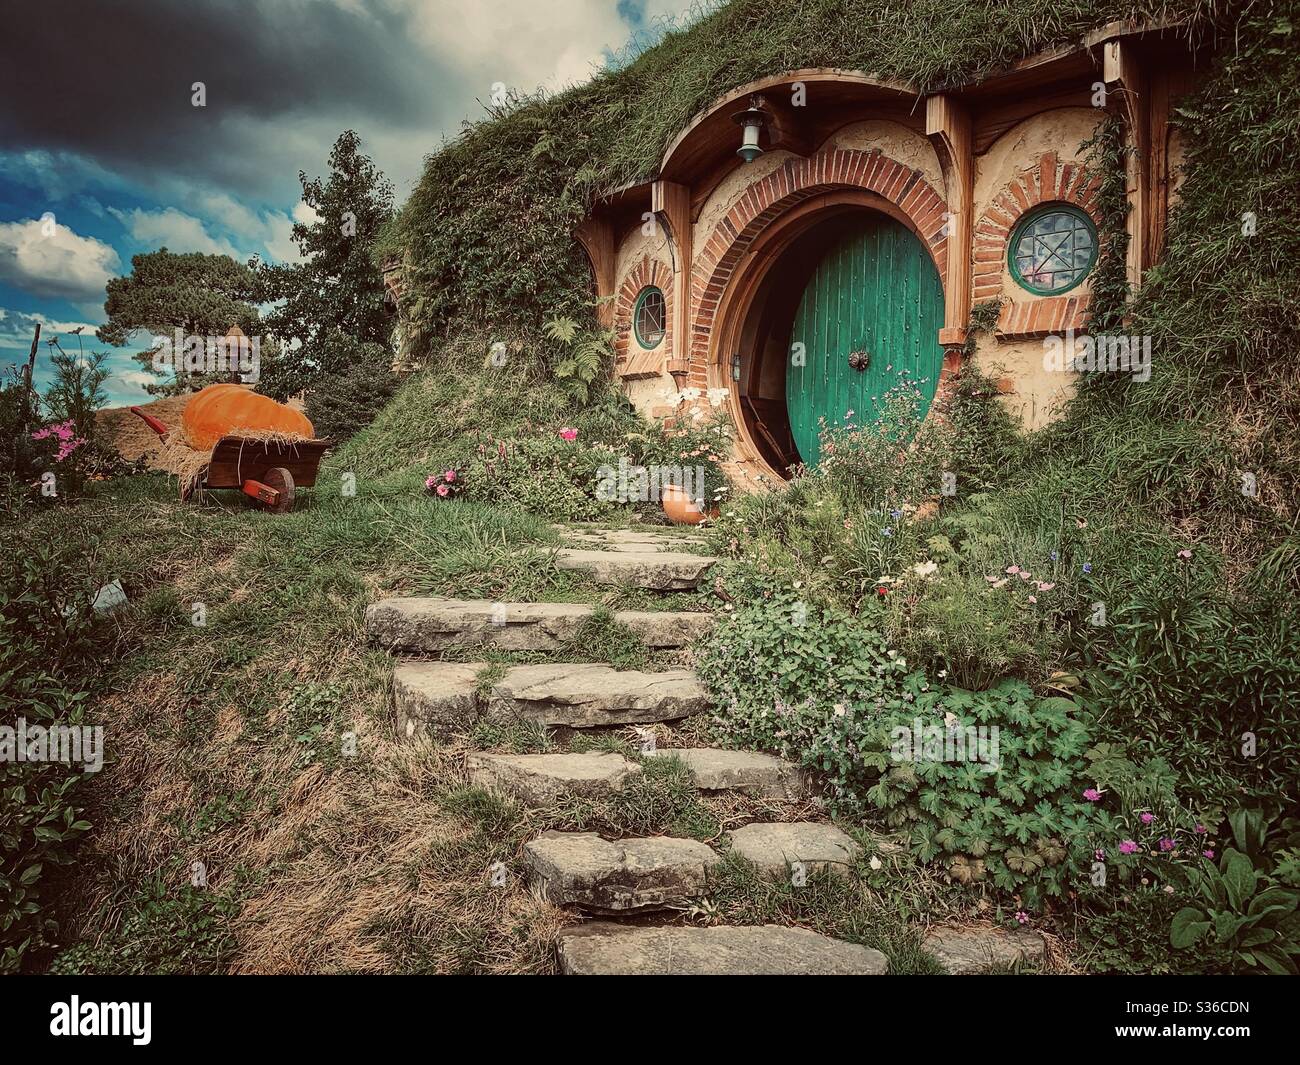 Hobbiton. Bucolic place in New Zealand where the hobbits from the Middle Earth live. Lord of the rings movie set. Stock Photo